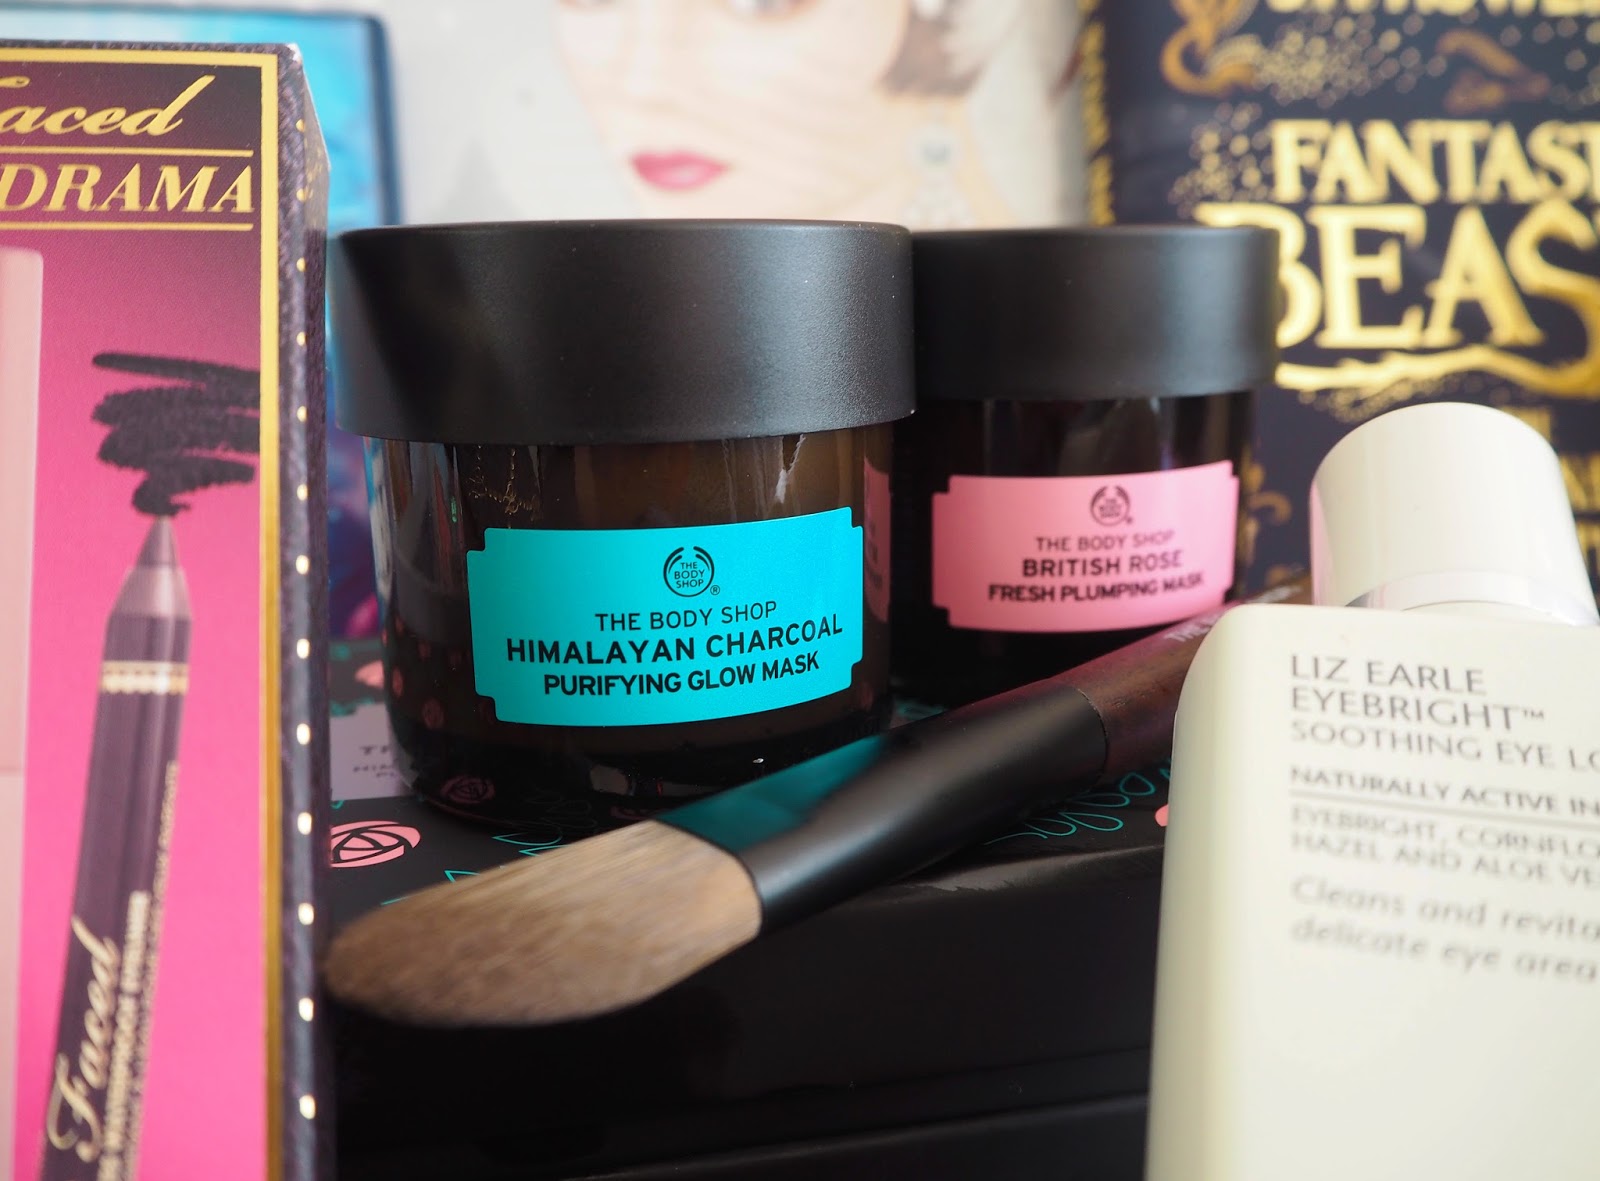 What I Got For Christmas 2016, Katie Kirk Loves, The Body Shop Face Masks, Christmas Gifts, Christmas Presents, UK Blogger, Fashion Blogger, Beauty Blogger, Lifestyle Blogger, Present Haul